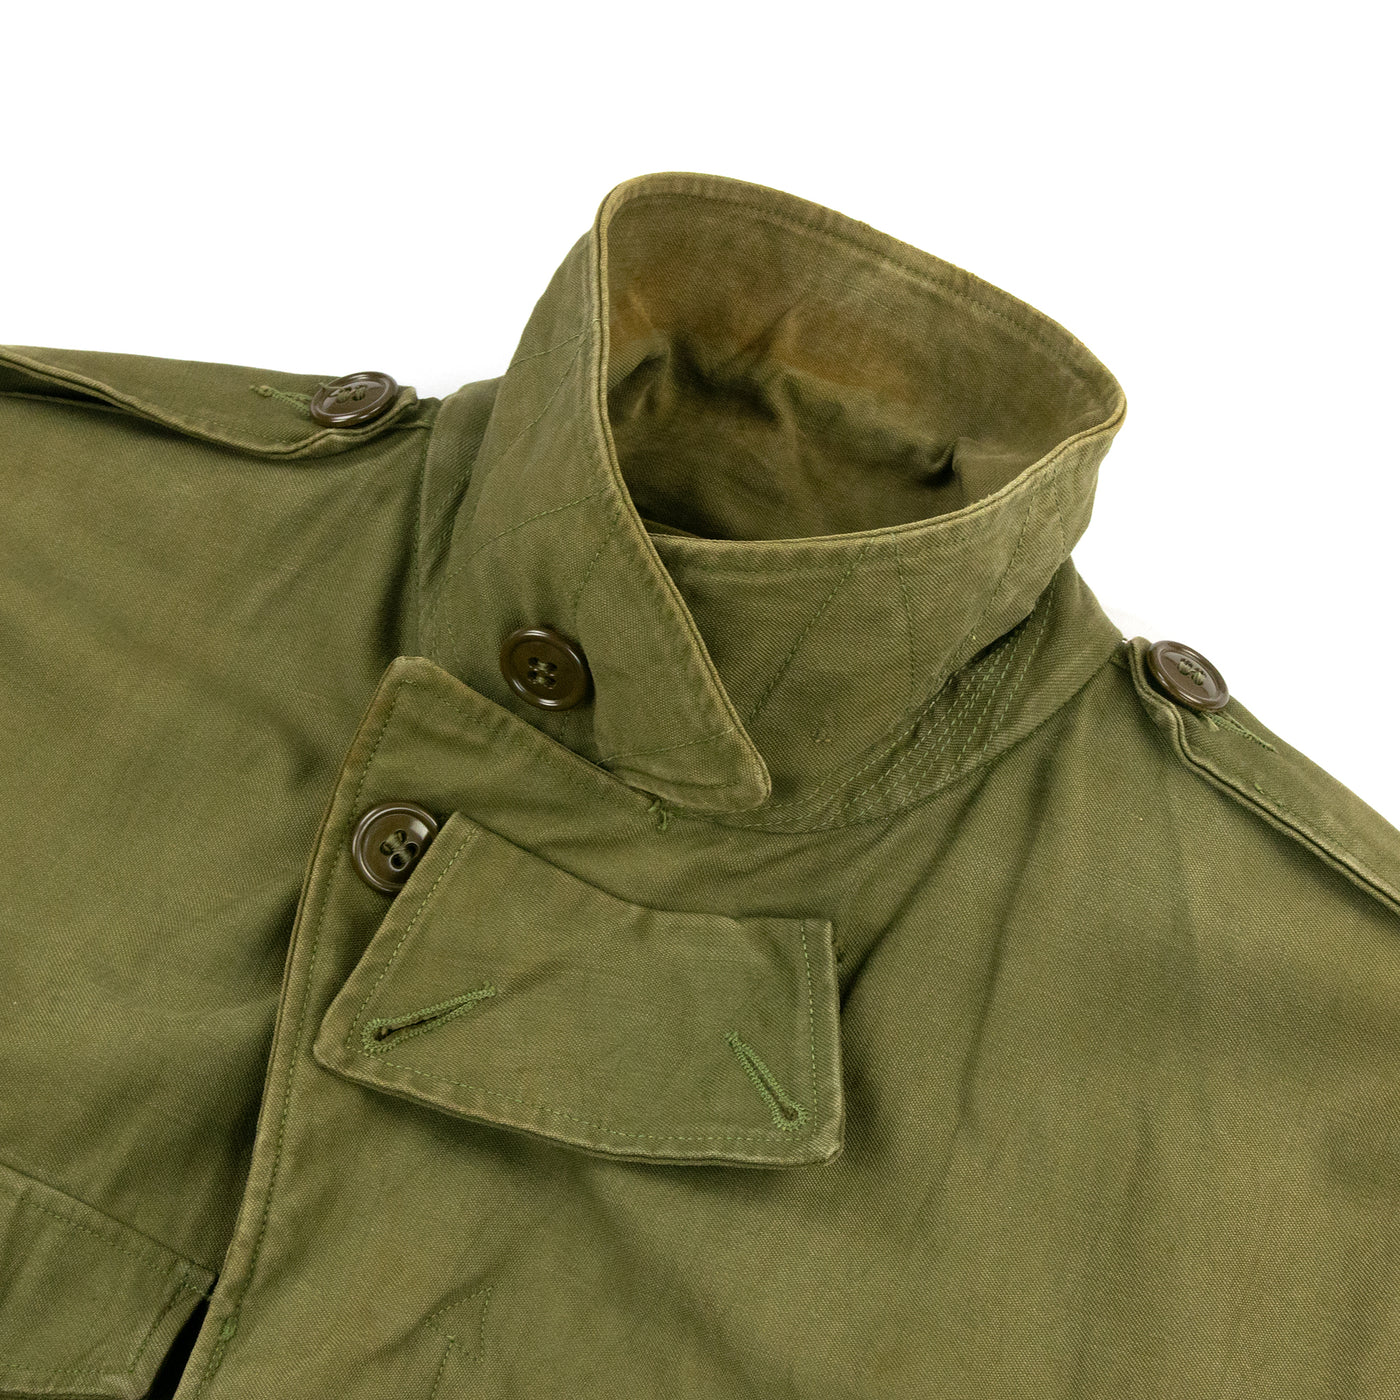 Vintage 1940s M-1943 US Army WWII Military Field Jacket Olive Green - M Neck